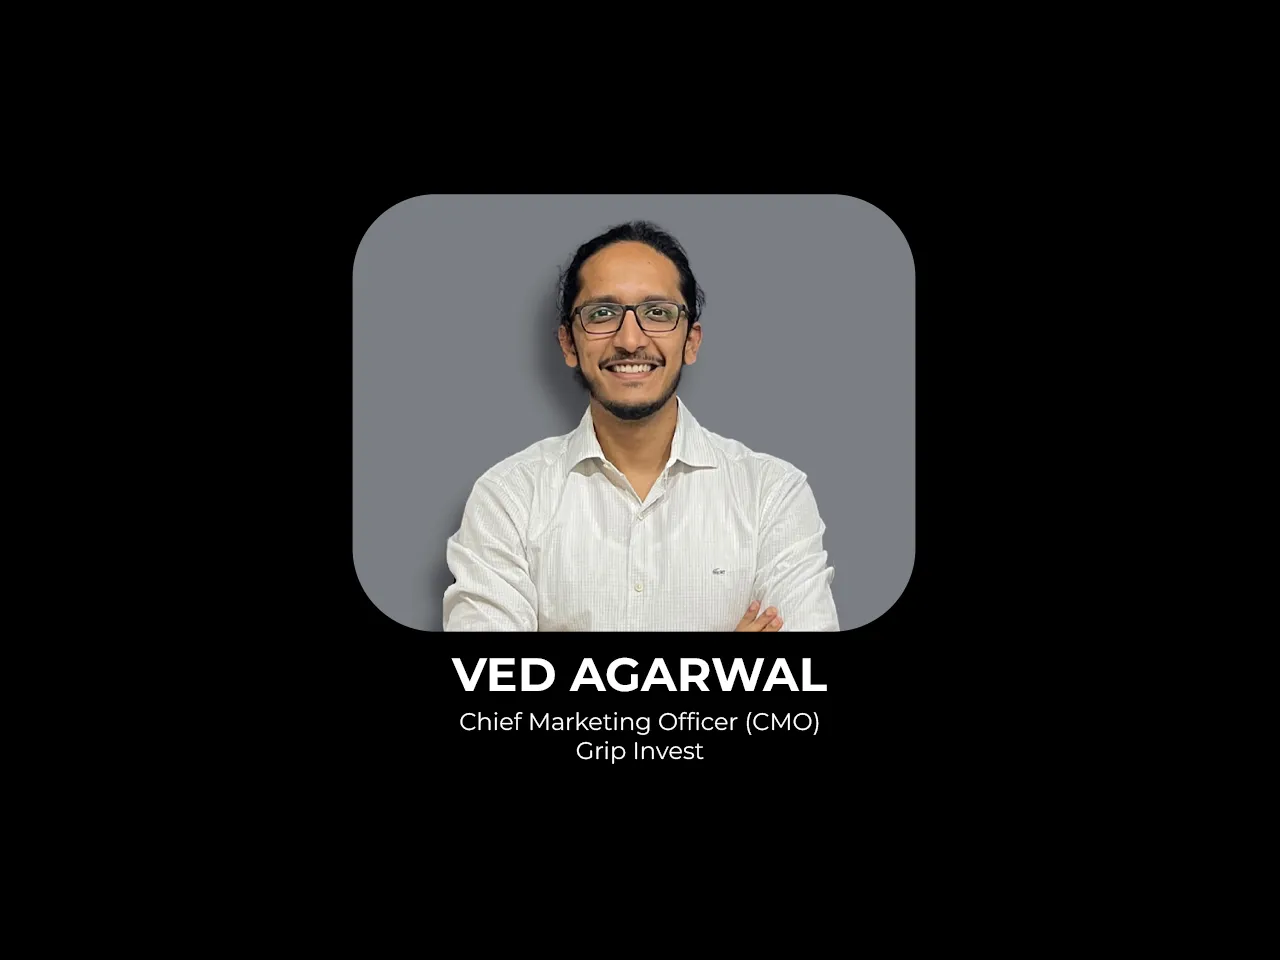 Ved Agarwal joins Grip Invest as CMO